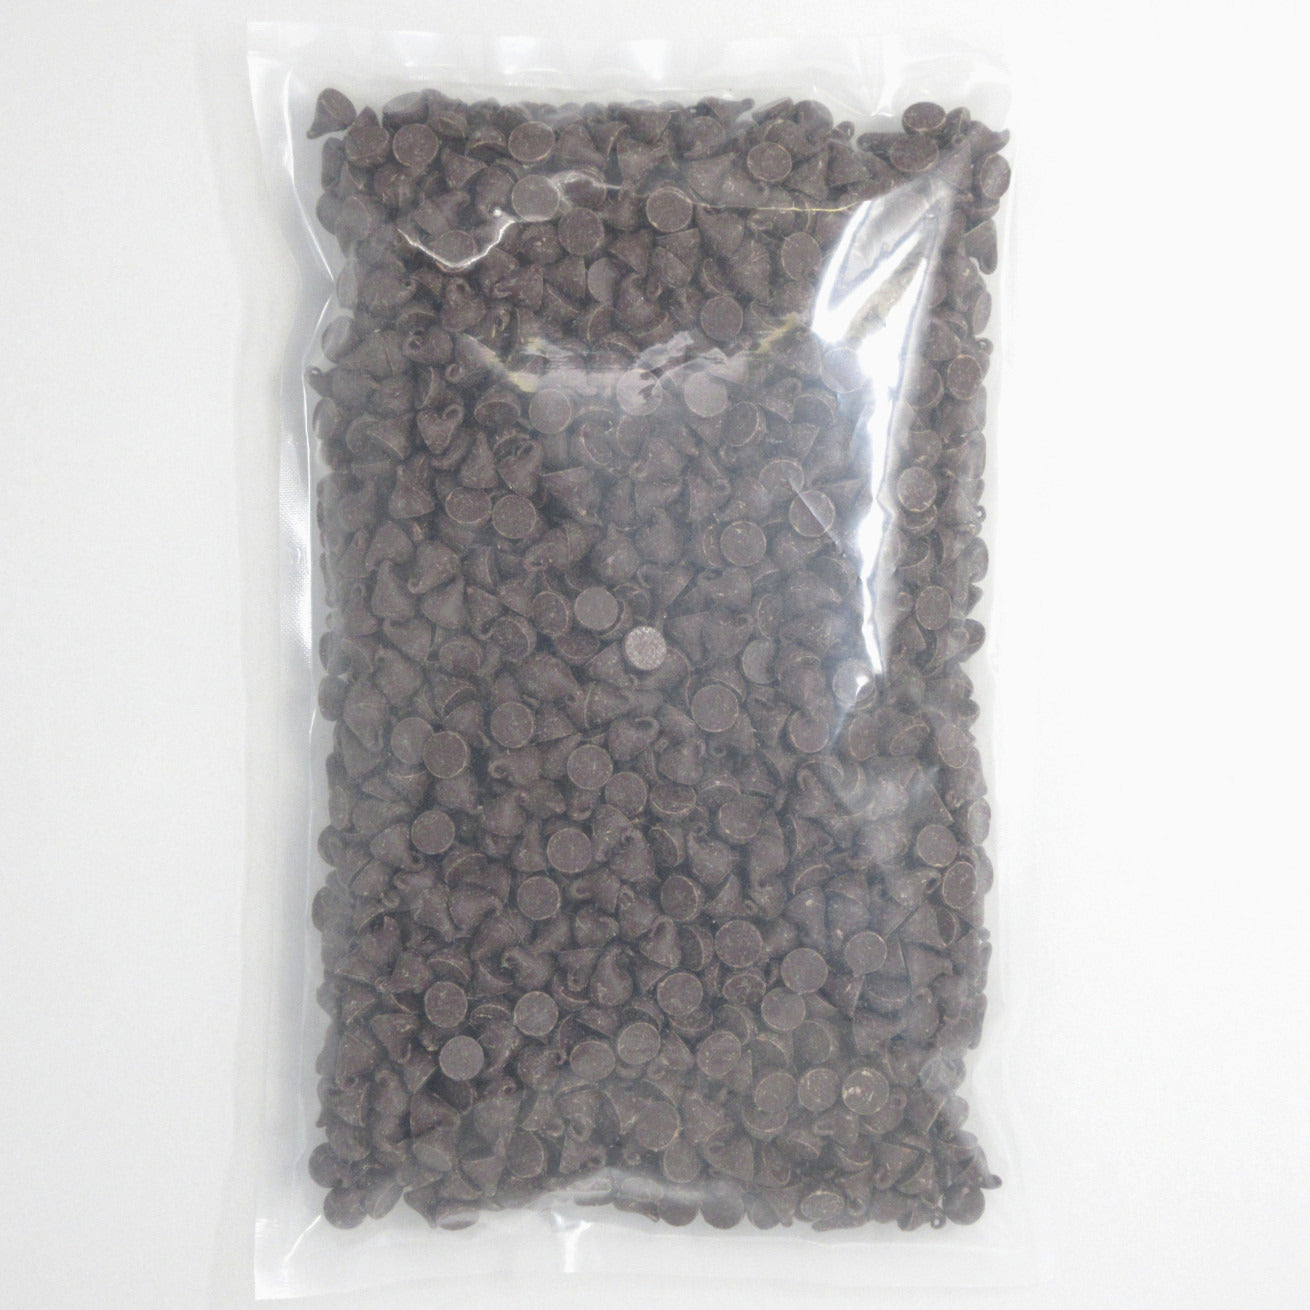 Flour Barrel product image - Pure Chocolate Chips Large